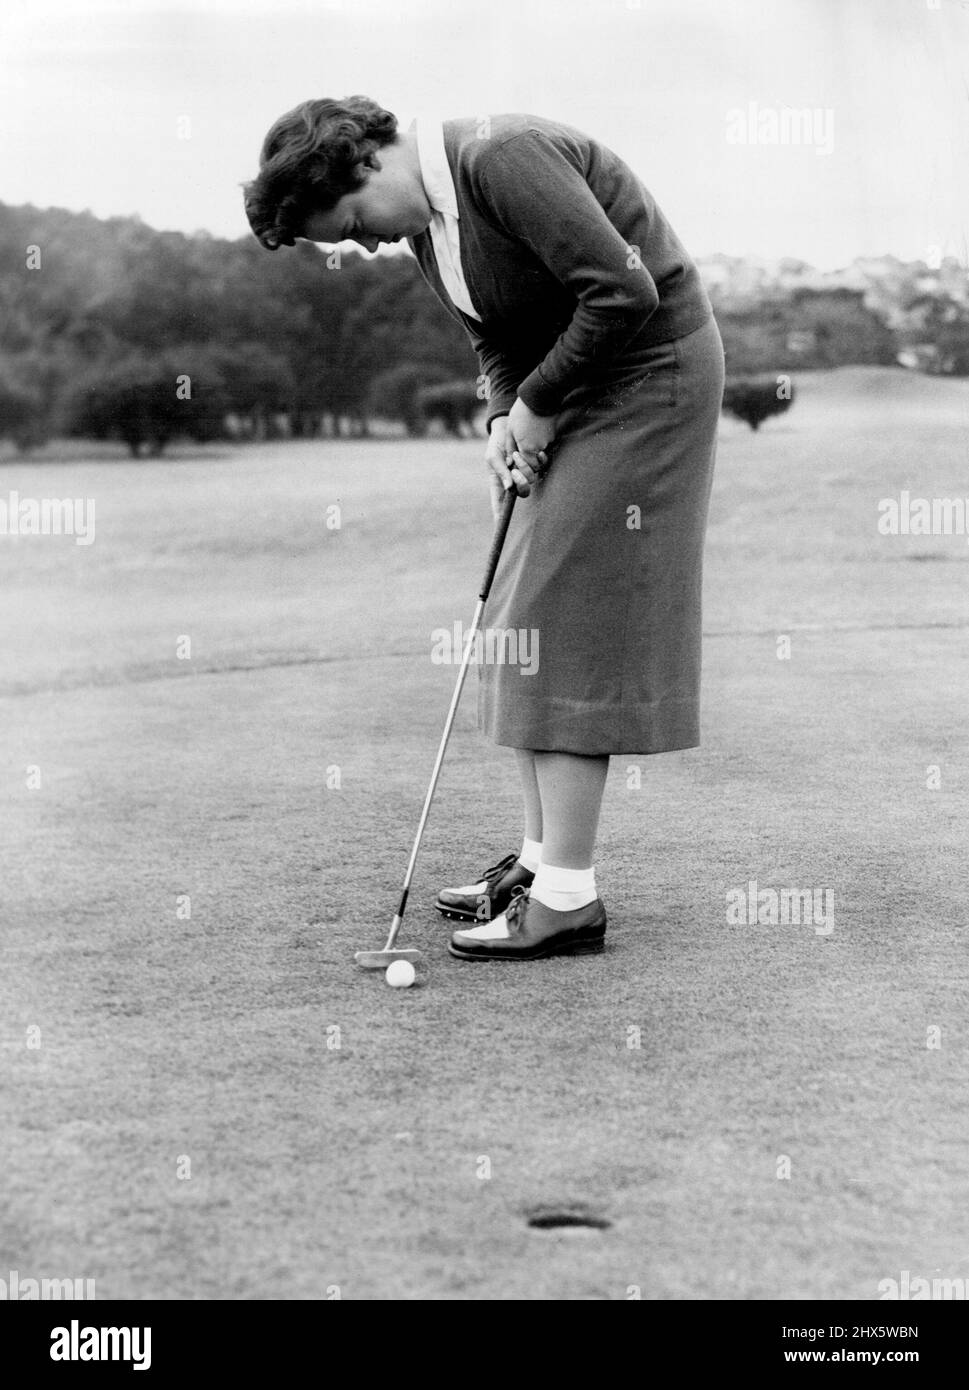 Vintage golfers Black and White Stock Photos & Images - Alamy